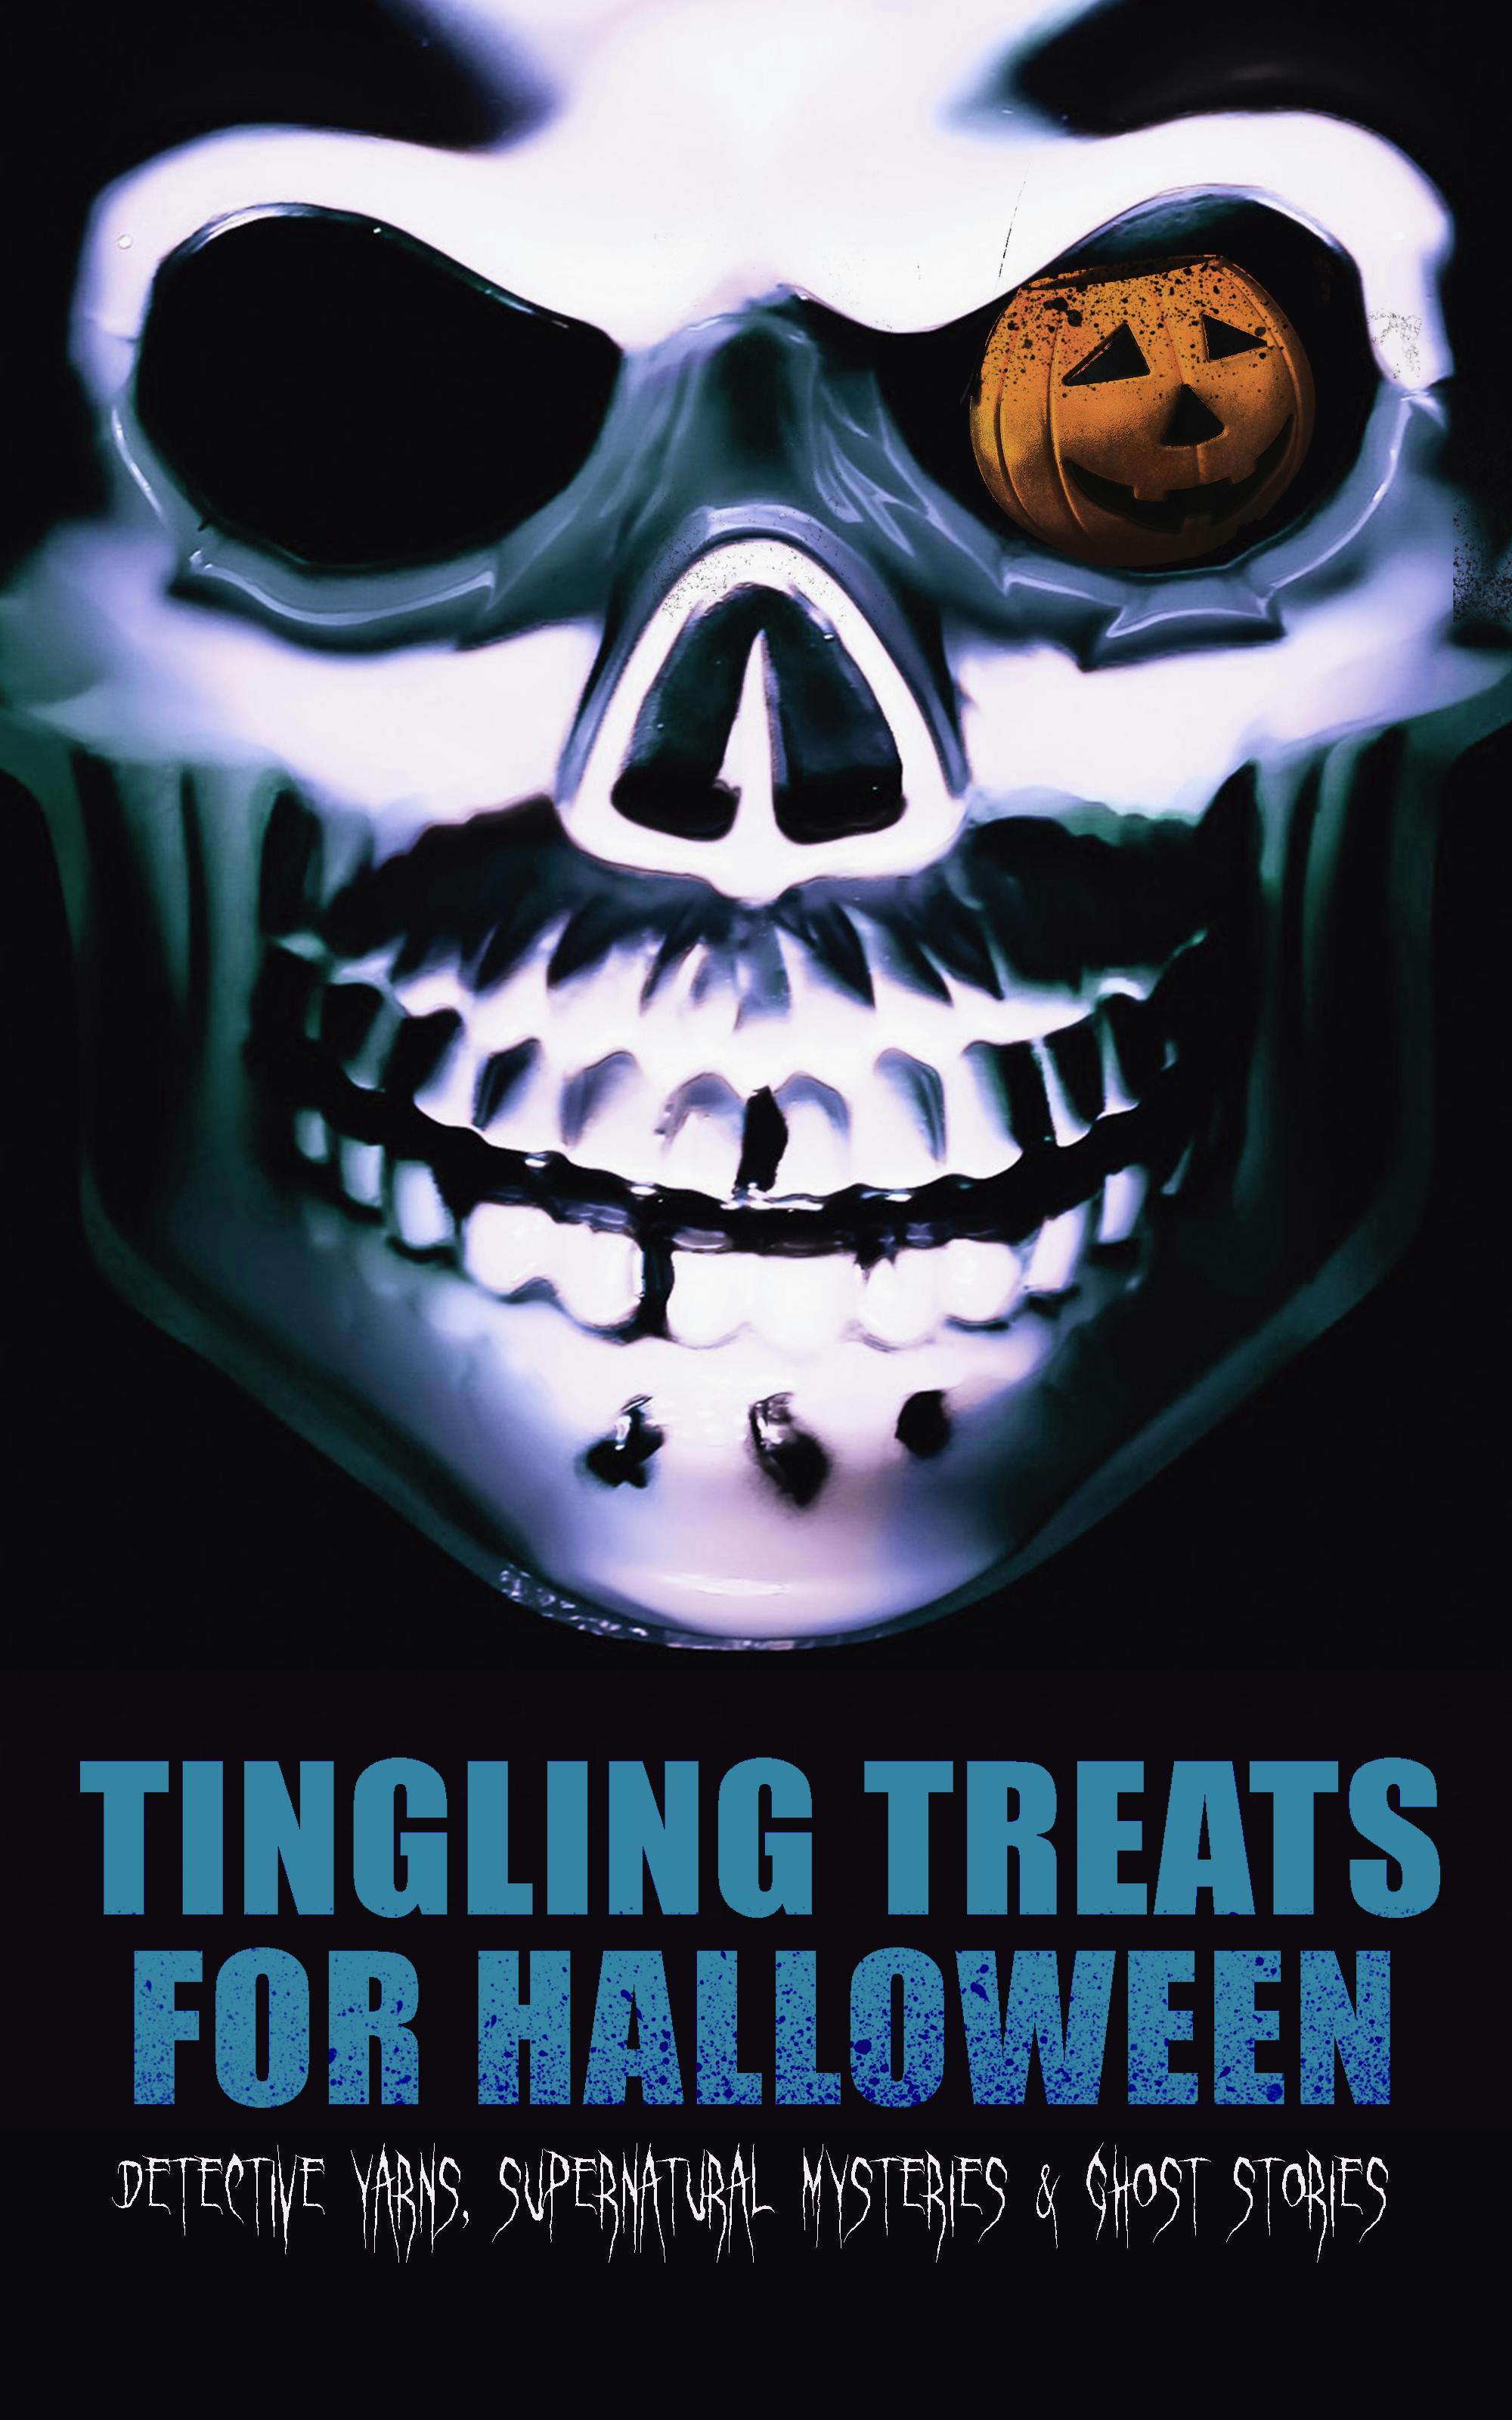 Tingling Treats for Halloween: Detective Yarns, Supernatural Mysteries & Ghost Stories: A Witch's Den, The Black Hand , Number 13, The Birth Mark, The Oblong Box, The Horla, When the World Was Young, Ligeia, The Rope of Fear, Clarimonde, The Lost Room, Thrawn Janet, The Purloined Letter… - undefined